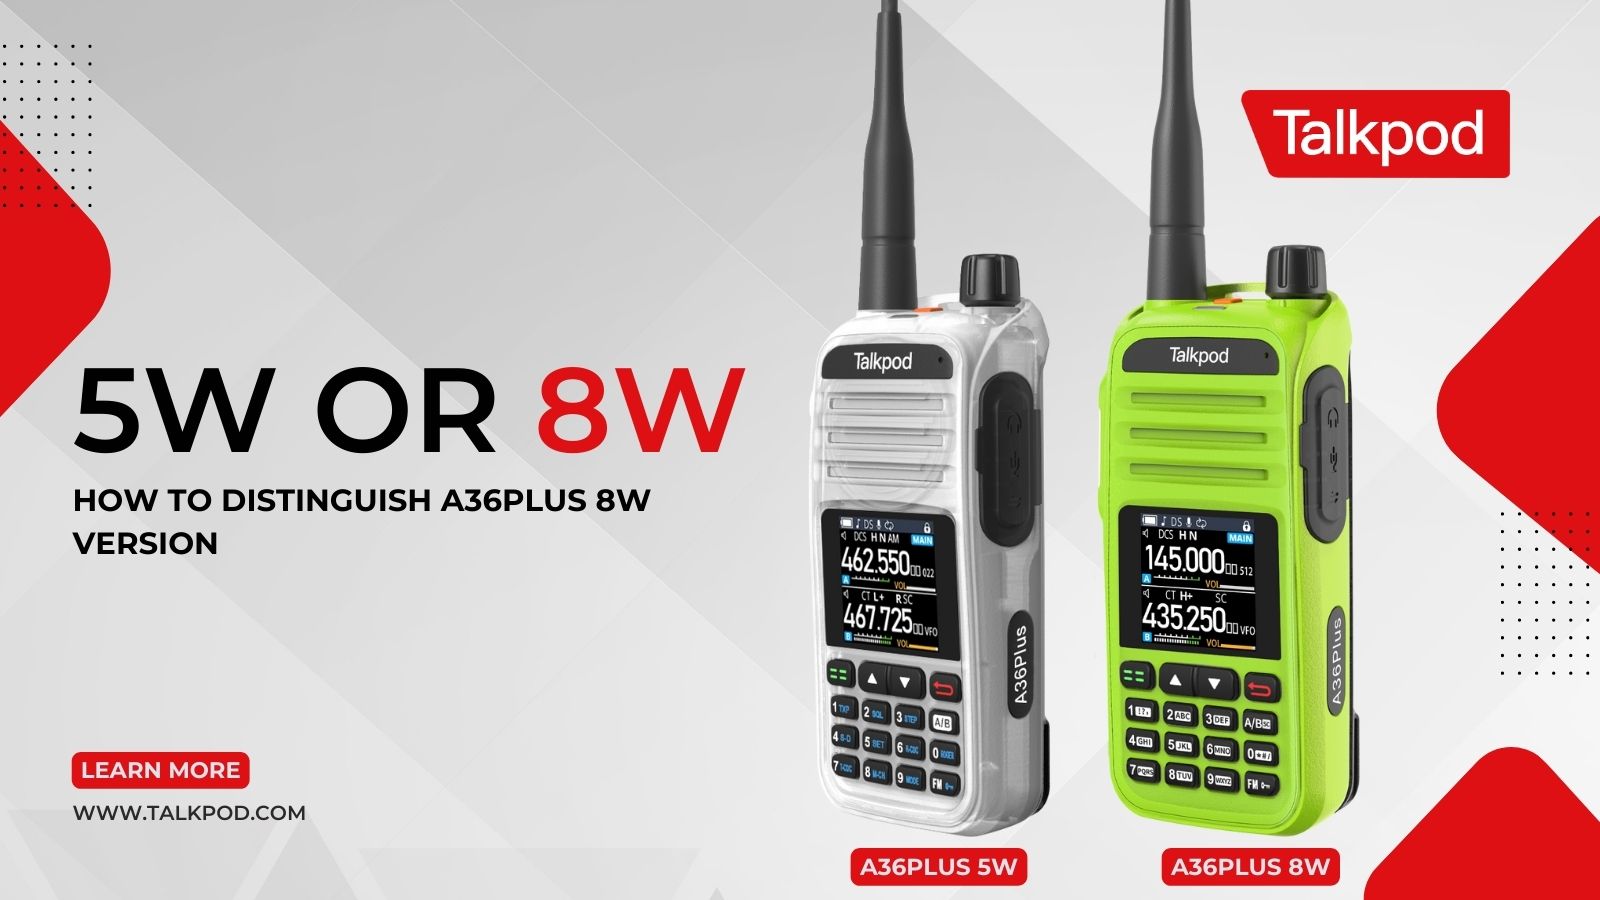 Exploring the Differences: A36Plus 8W vs. A36Plus 5W Radios